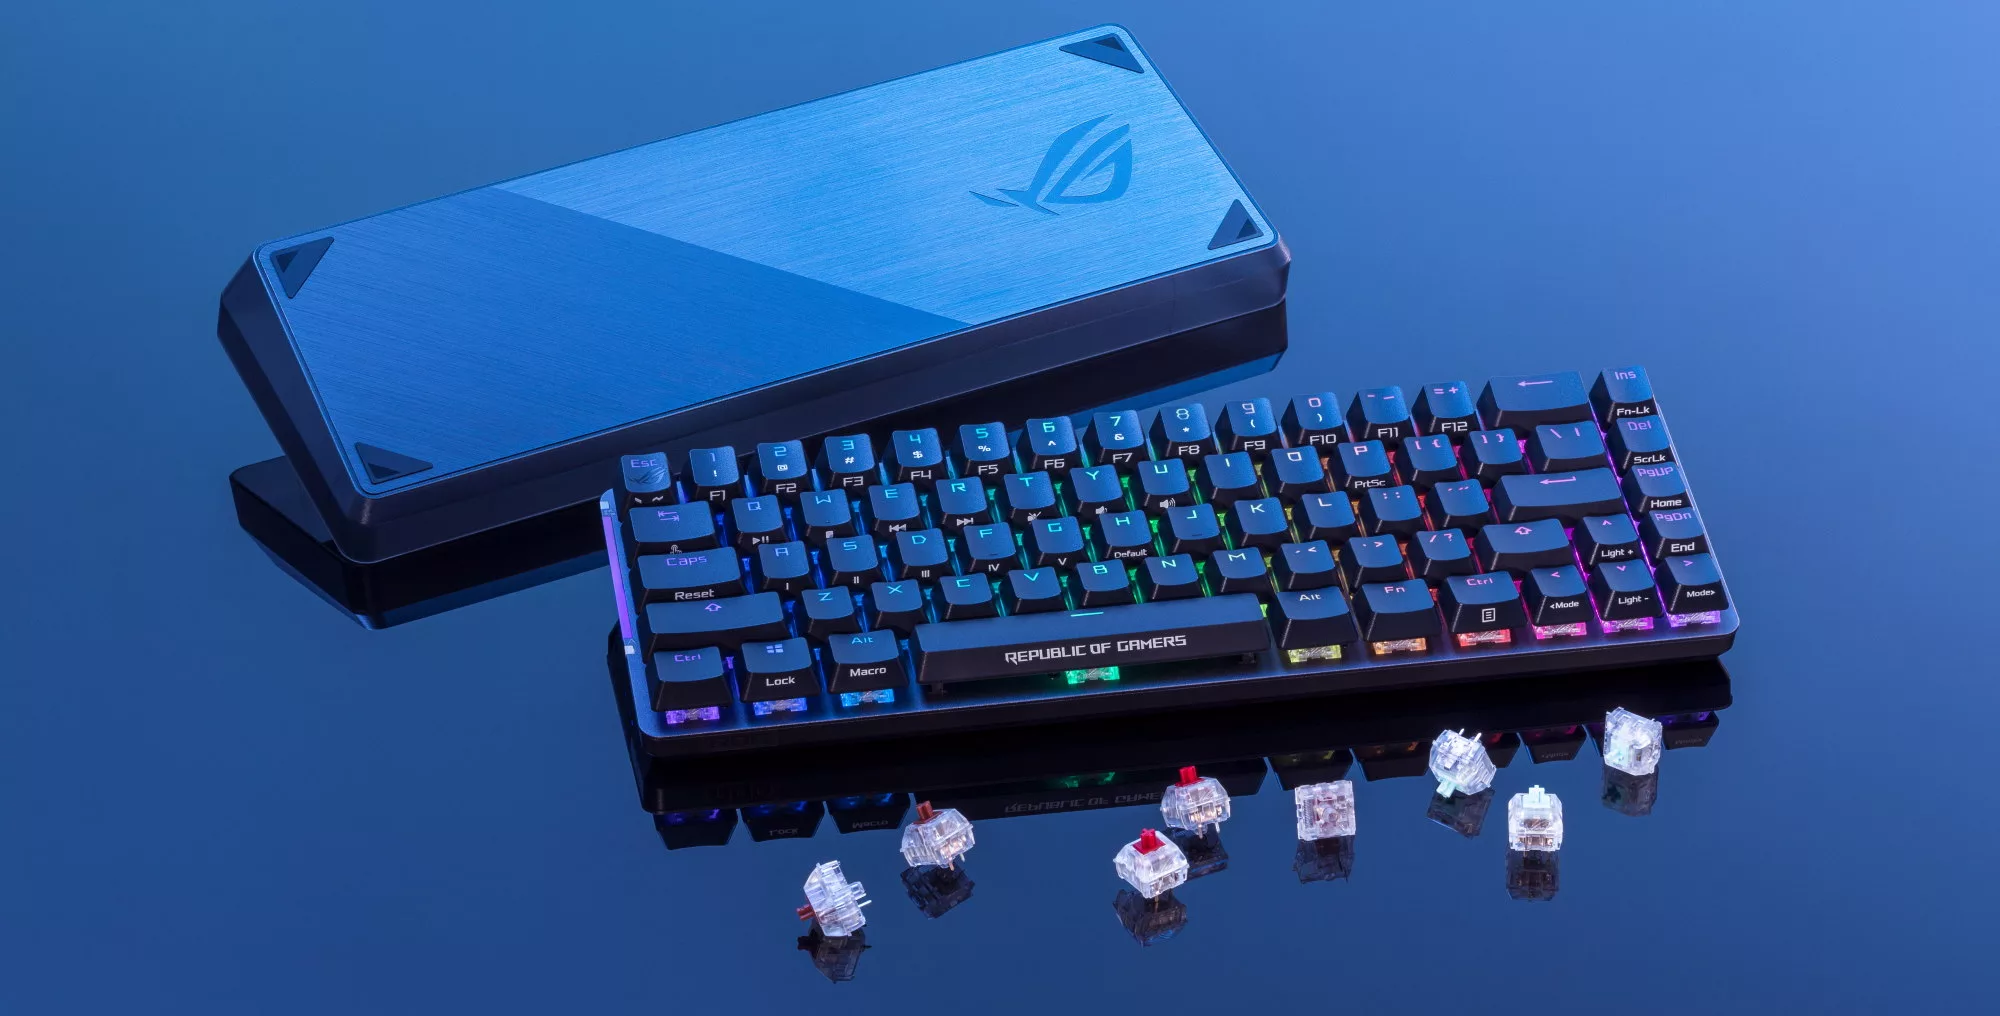 Two Strix keyboards, one upside down with the ROG logo on display, and multiple key switches in front of the pair.